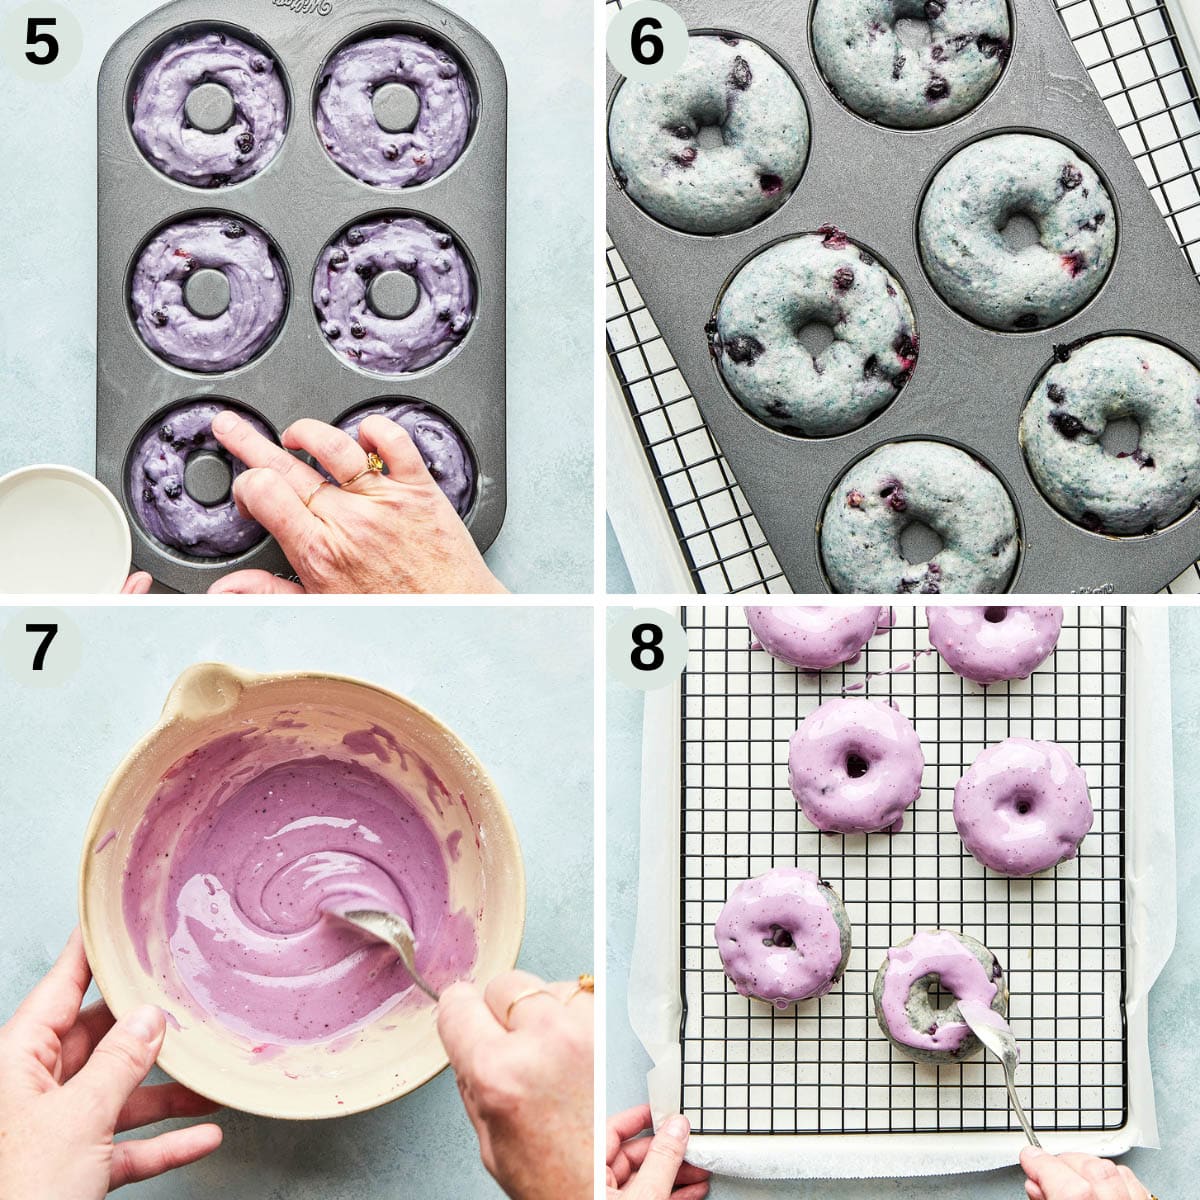 Process shots 5 to 8 to make baked donuts.